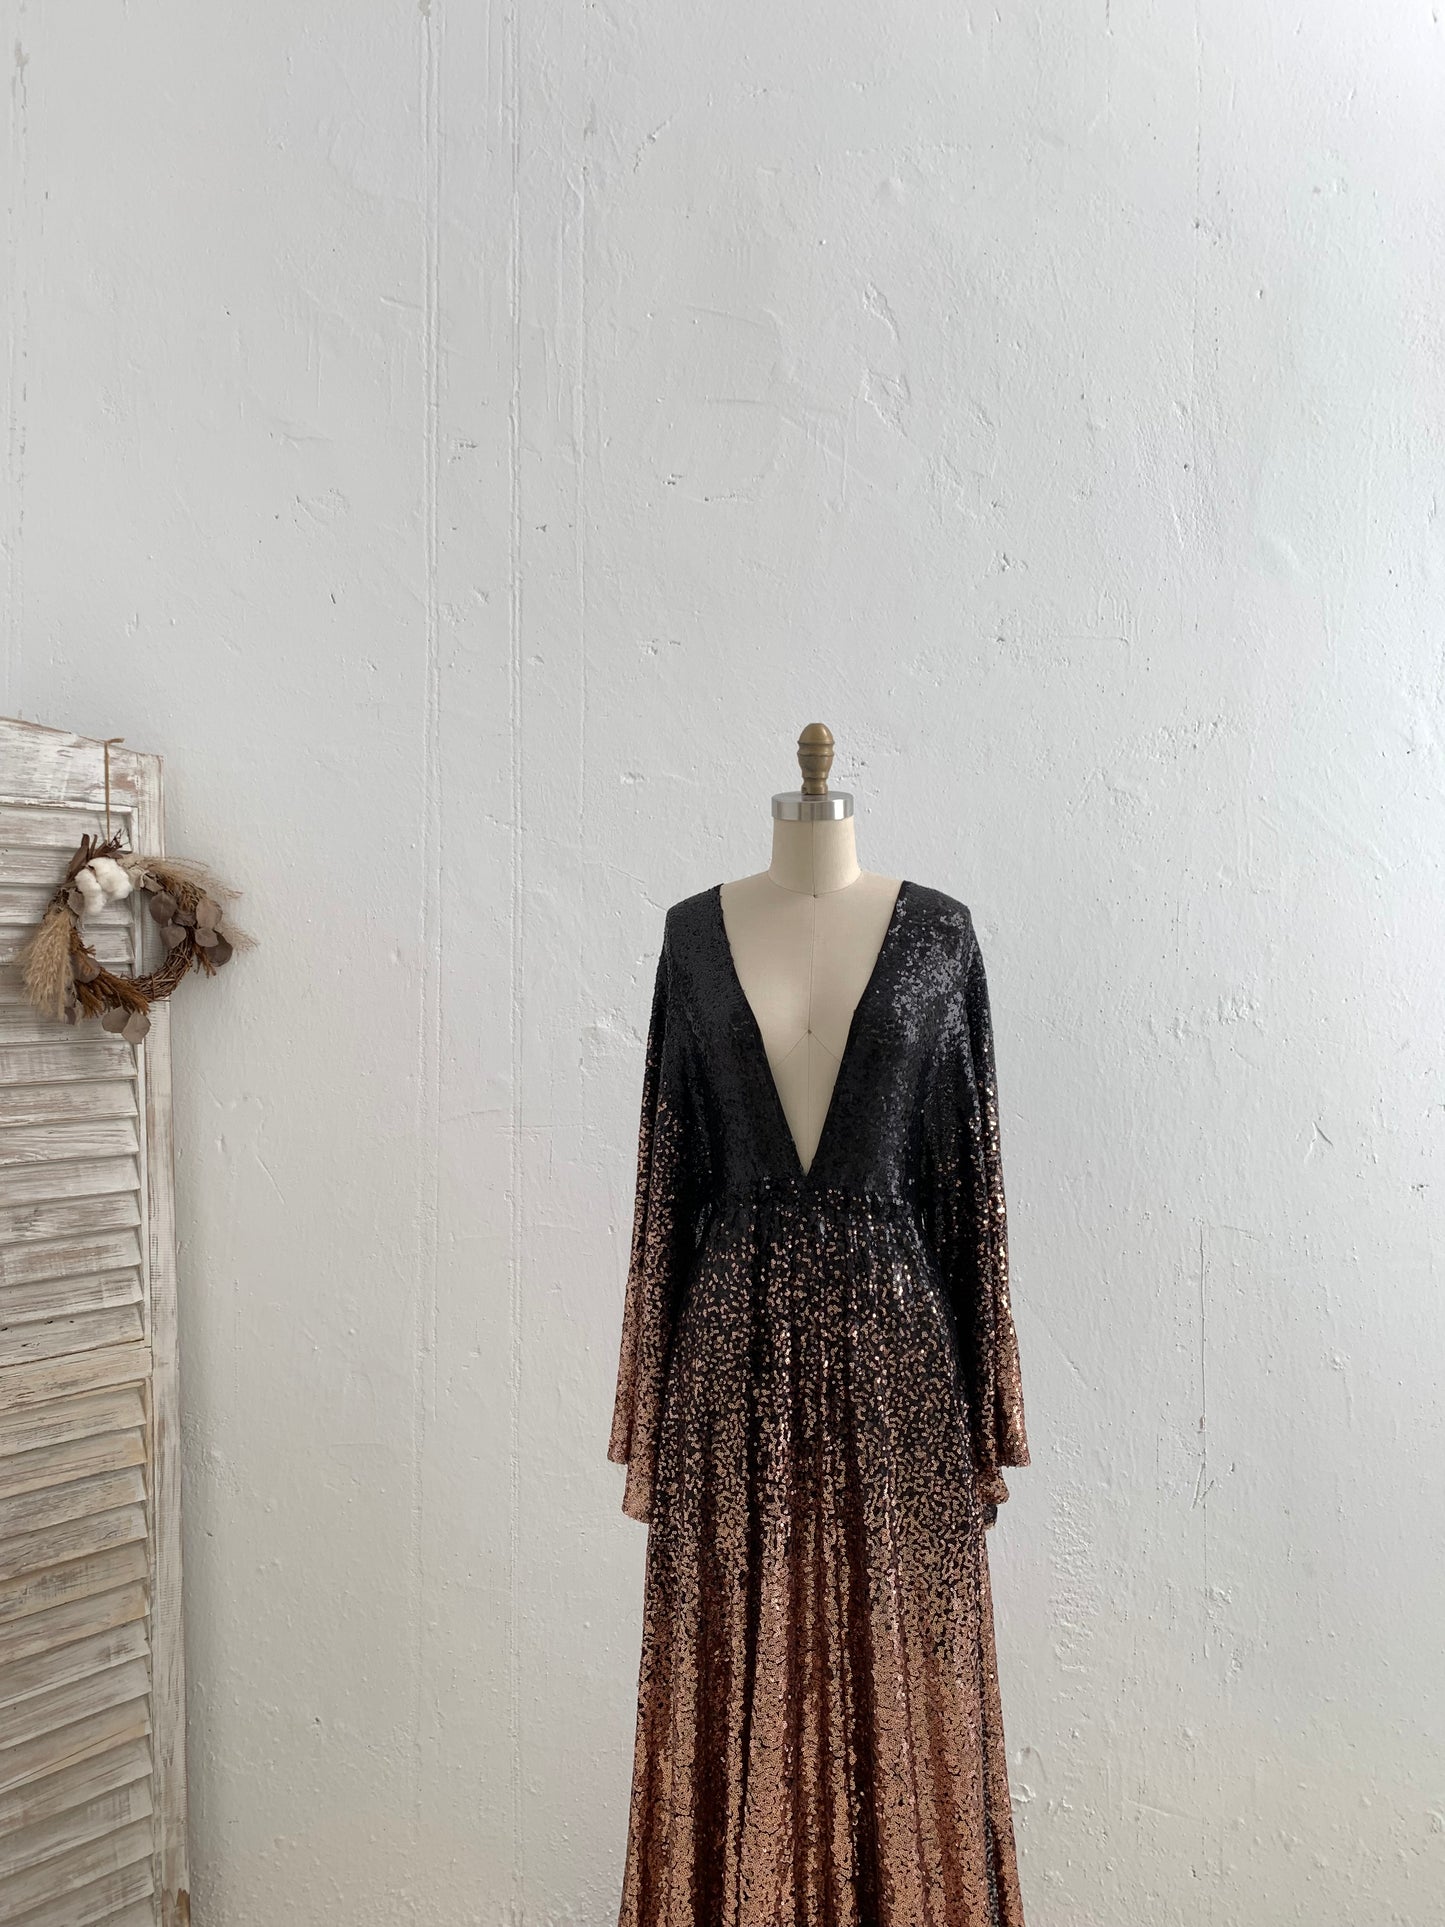 Ombre Sequin Maternity Dress for Photo Shoot Photography Dress